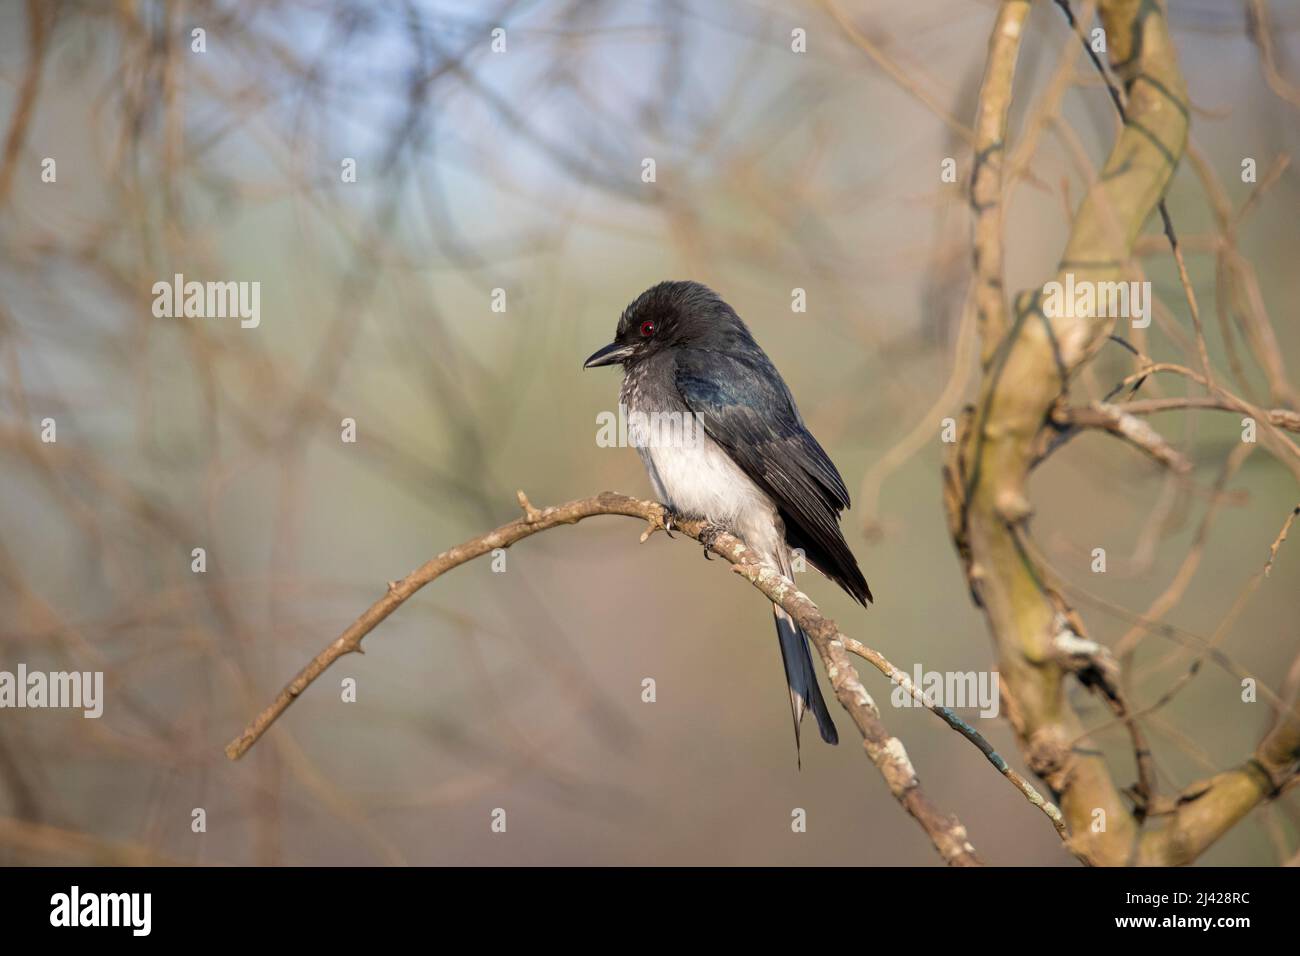 White-bellied drongo bird perched on a twig Stock Photo